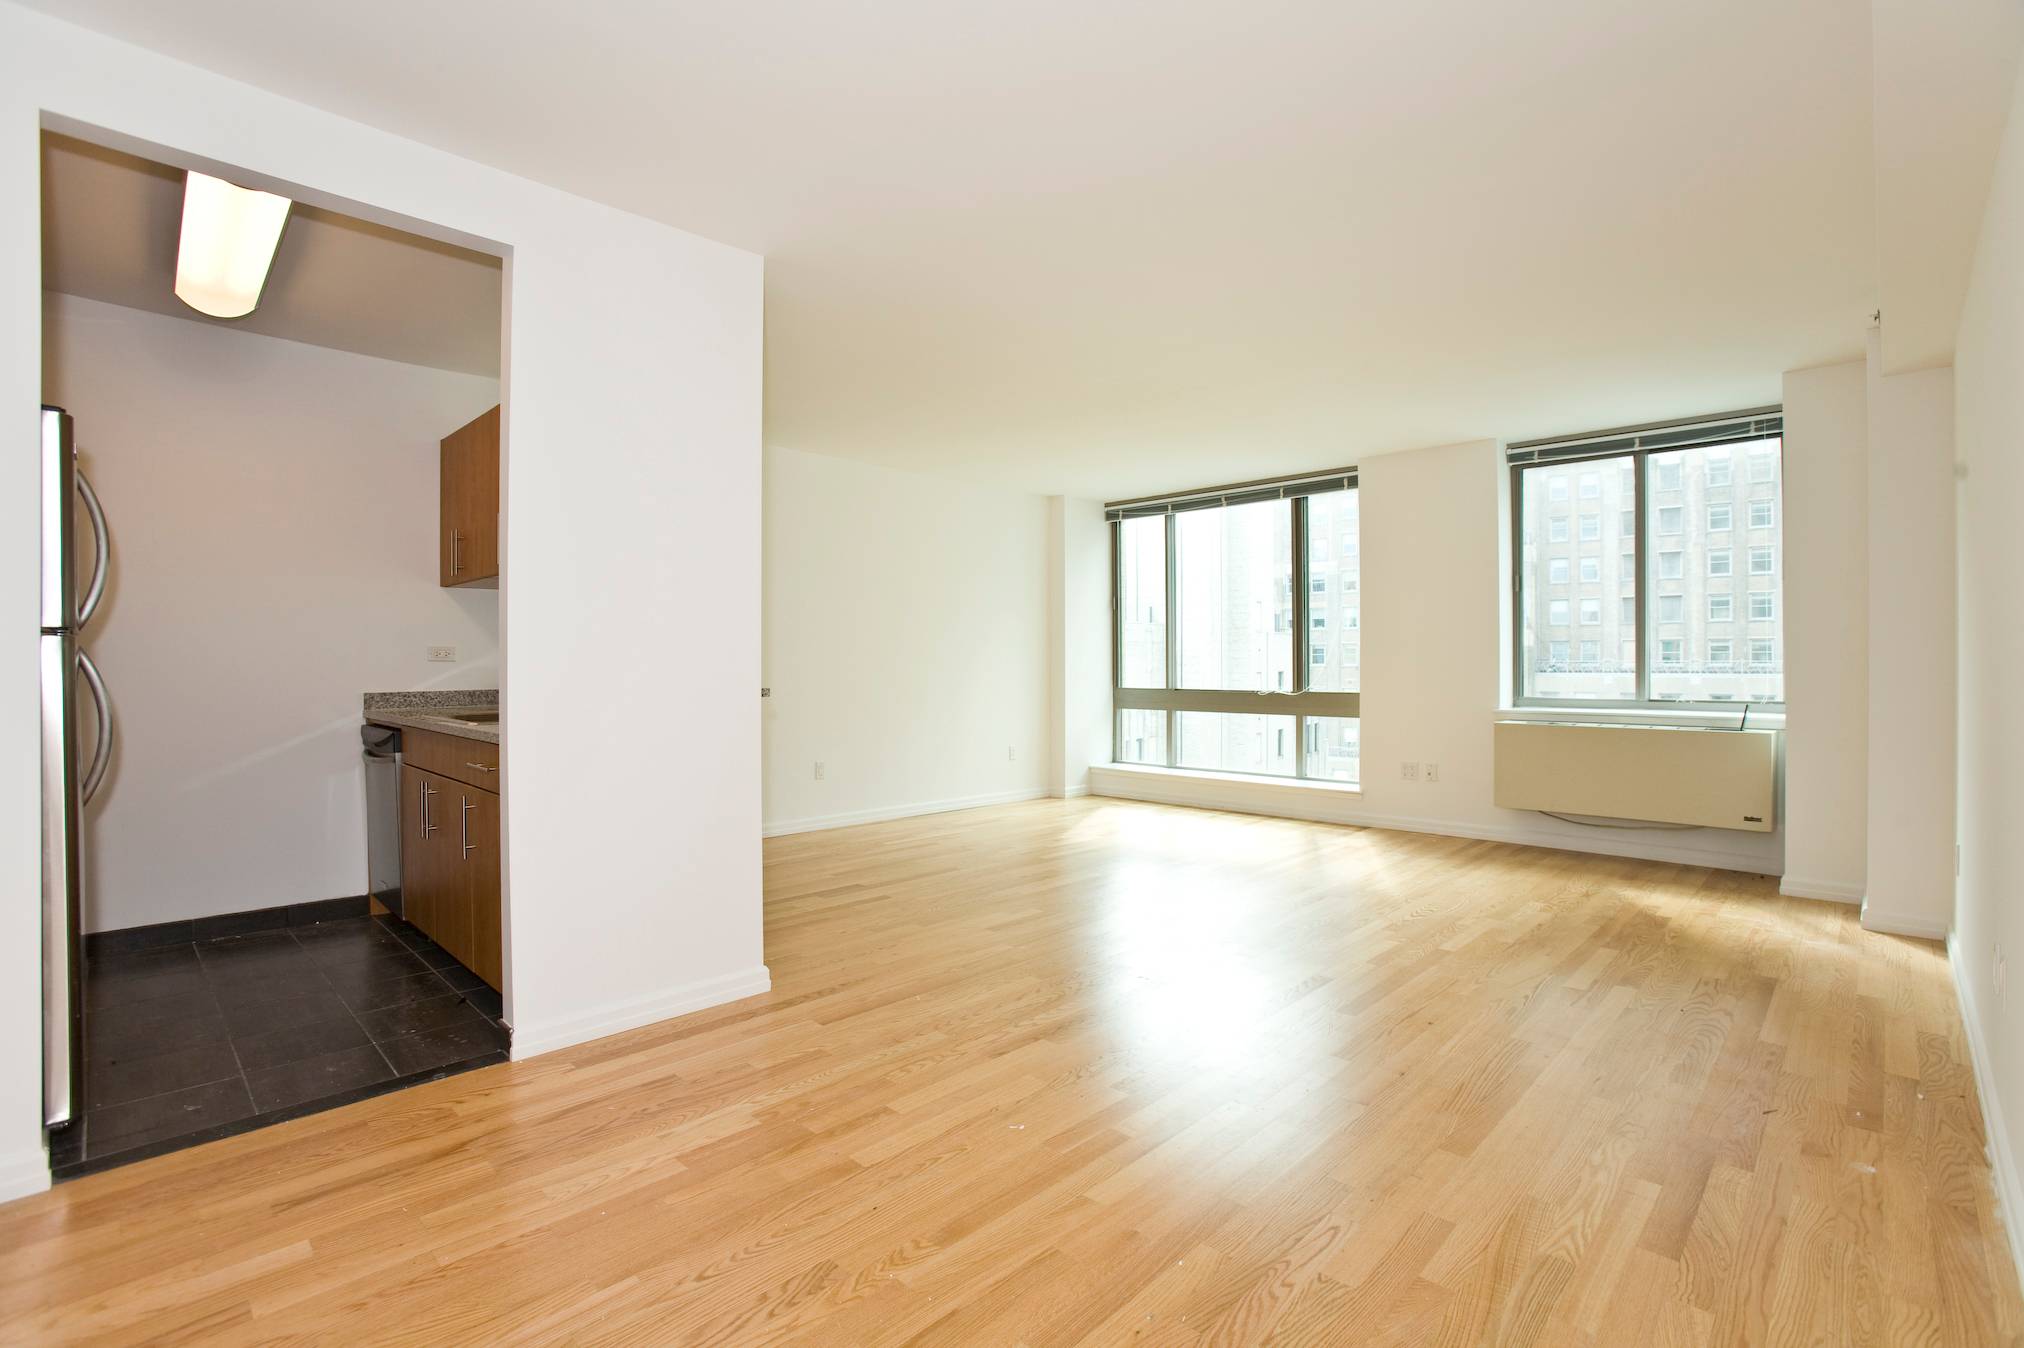 NO FEE + 1 MONTH FREE: Huge One Bedroom, Top of the Line Amenities, Steps from South Street Seaport!!